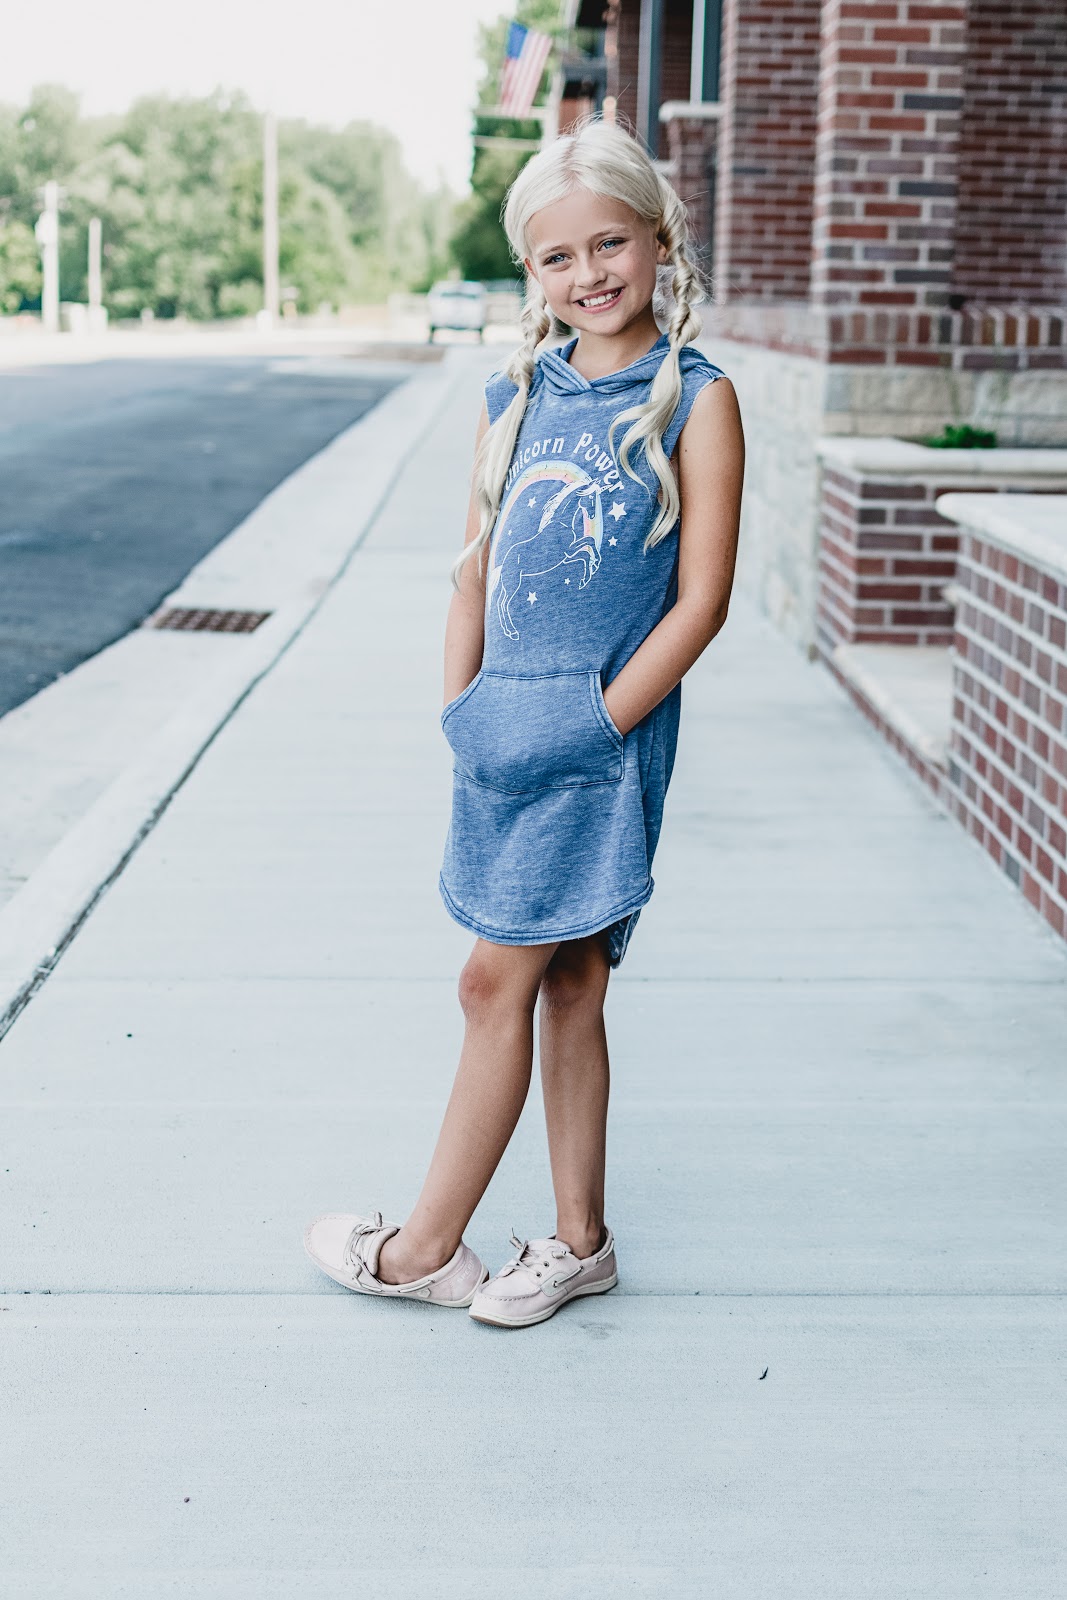 Back to school shopping, outfits, ideas, girl, little girl, backpack, shoes, clothes uniforms french toast